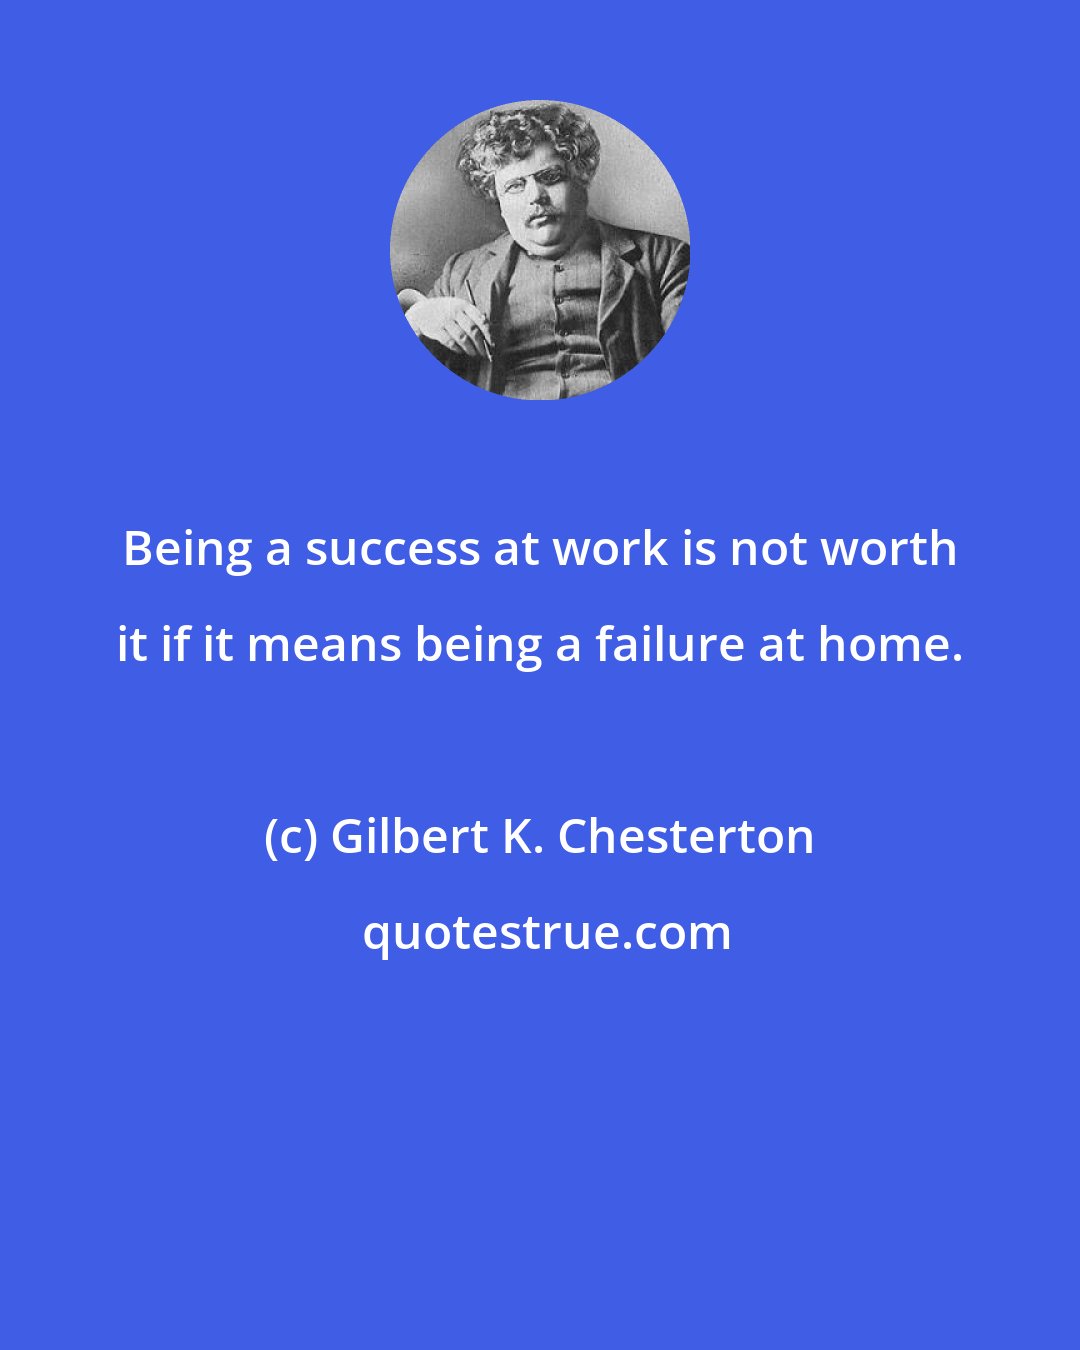 Gilbert K. Chesterton: Being a success at work is not worth it if it means being a failure at home.